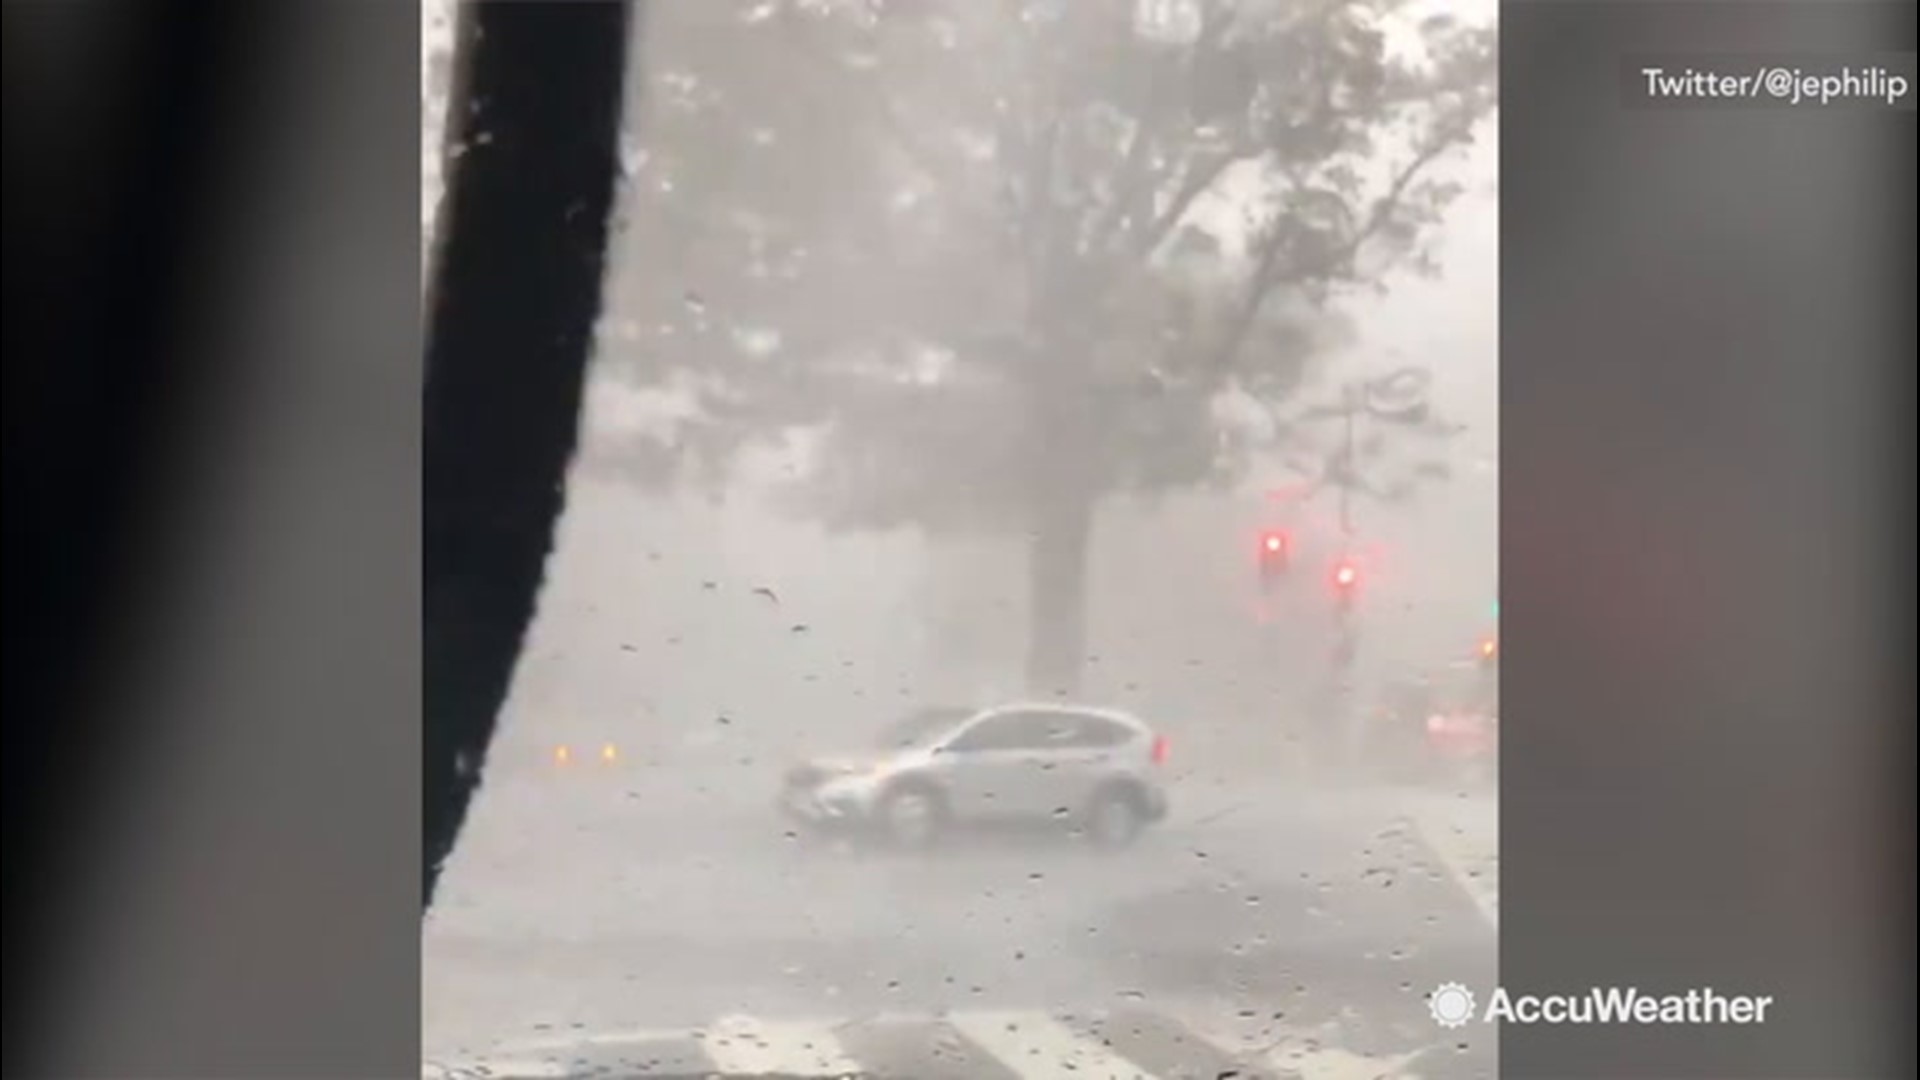 An umbrella was blown down the street by a storm in Washington, D.C., on Aug. 20, nearly hitting cars.